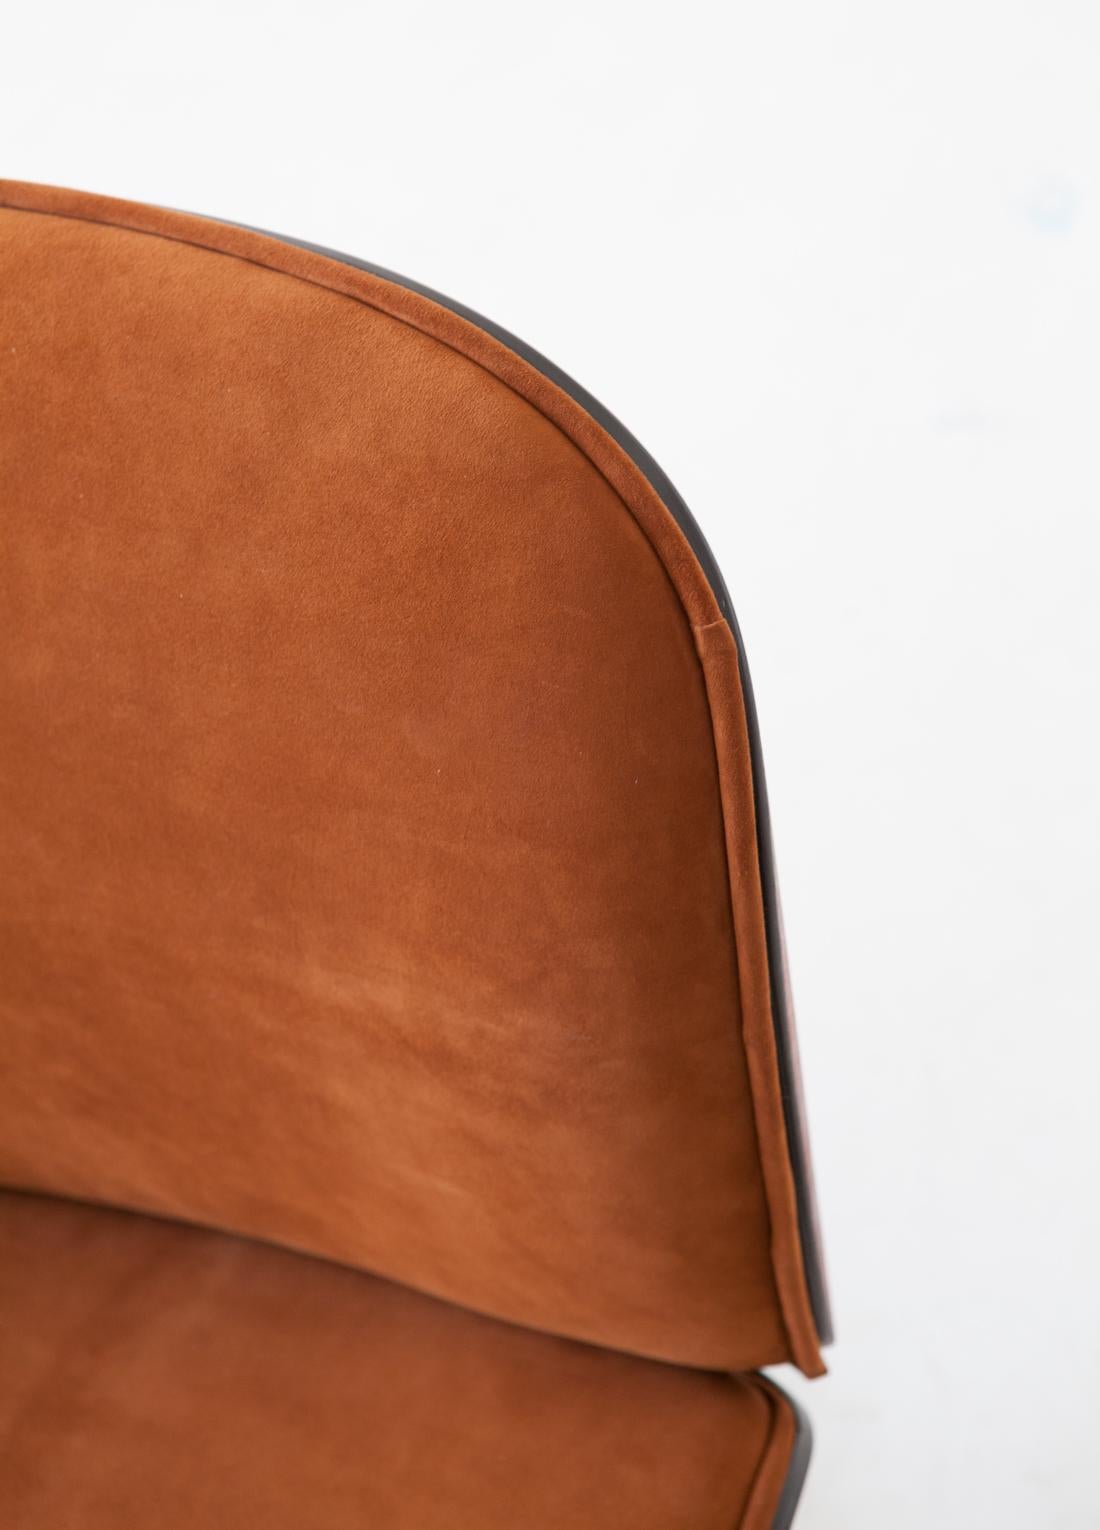 Mid-Century Modern Desk Chair by Ico Parisi for Mim,  Exotic Wood and Suede Leather